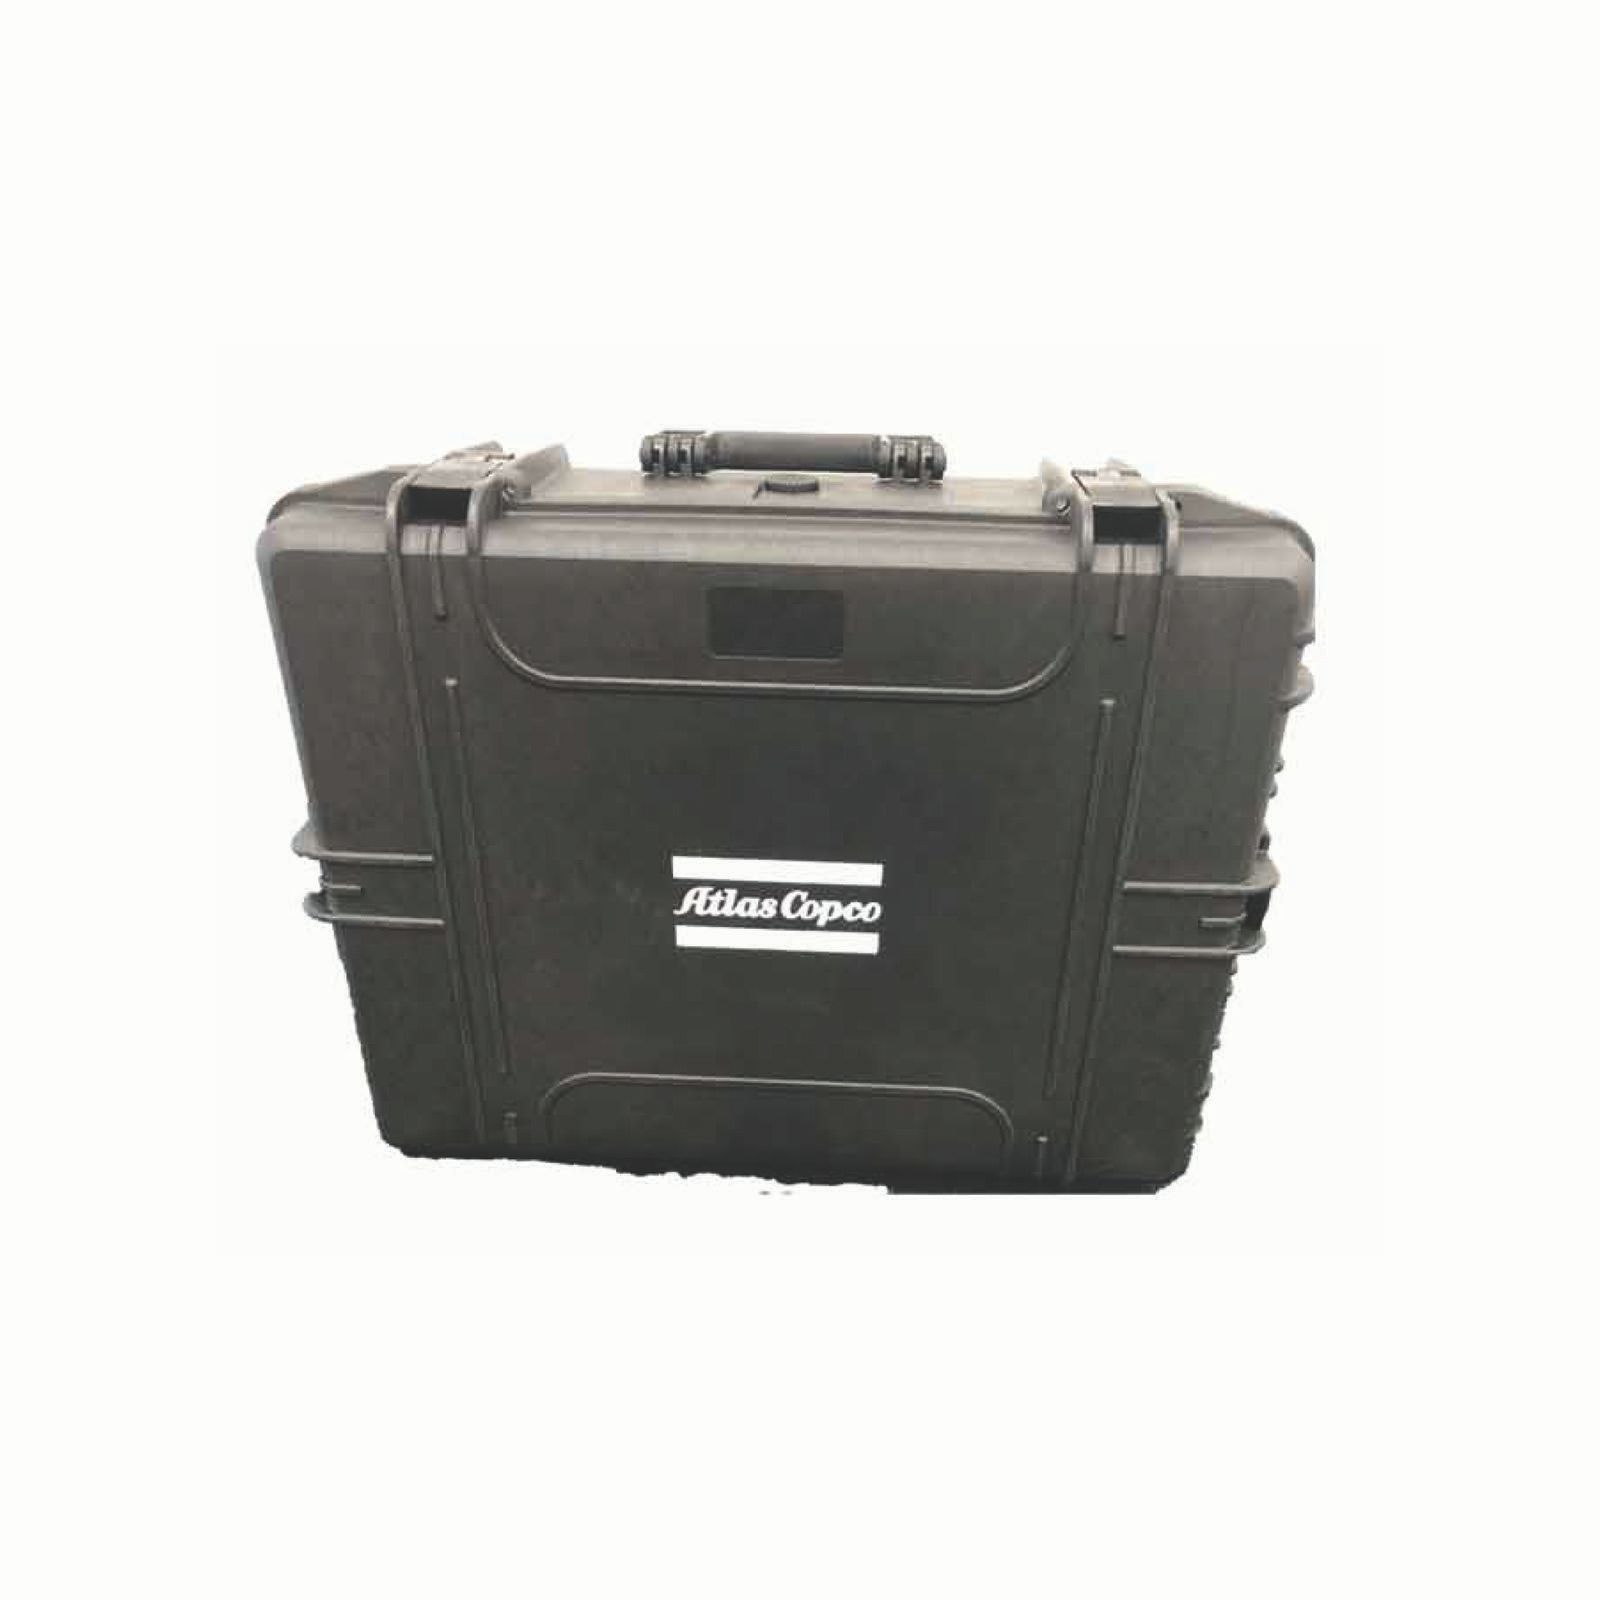 TOOL CASE productfoto